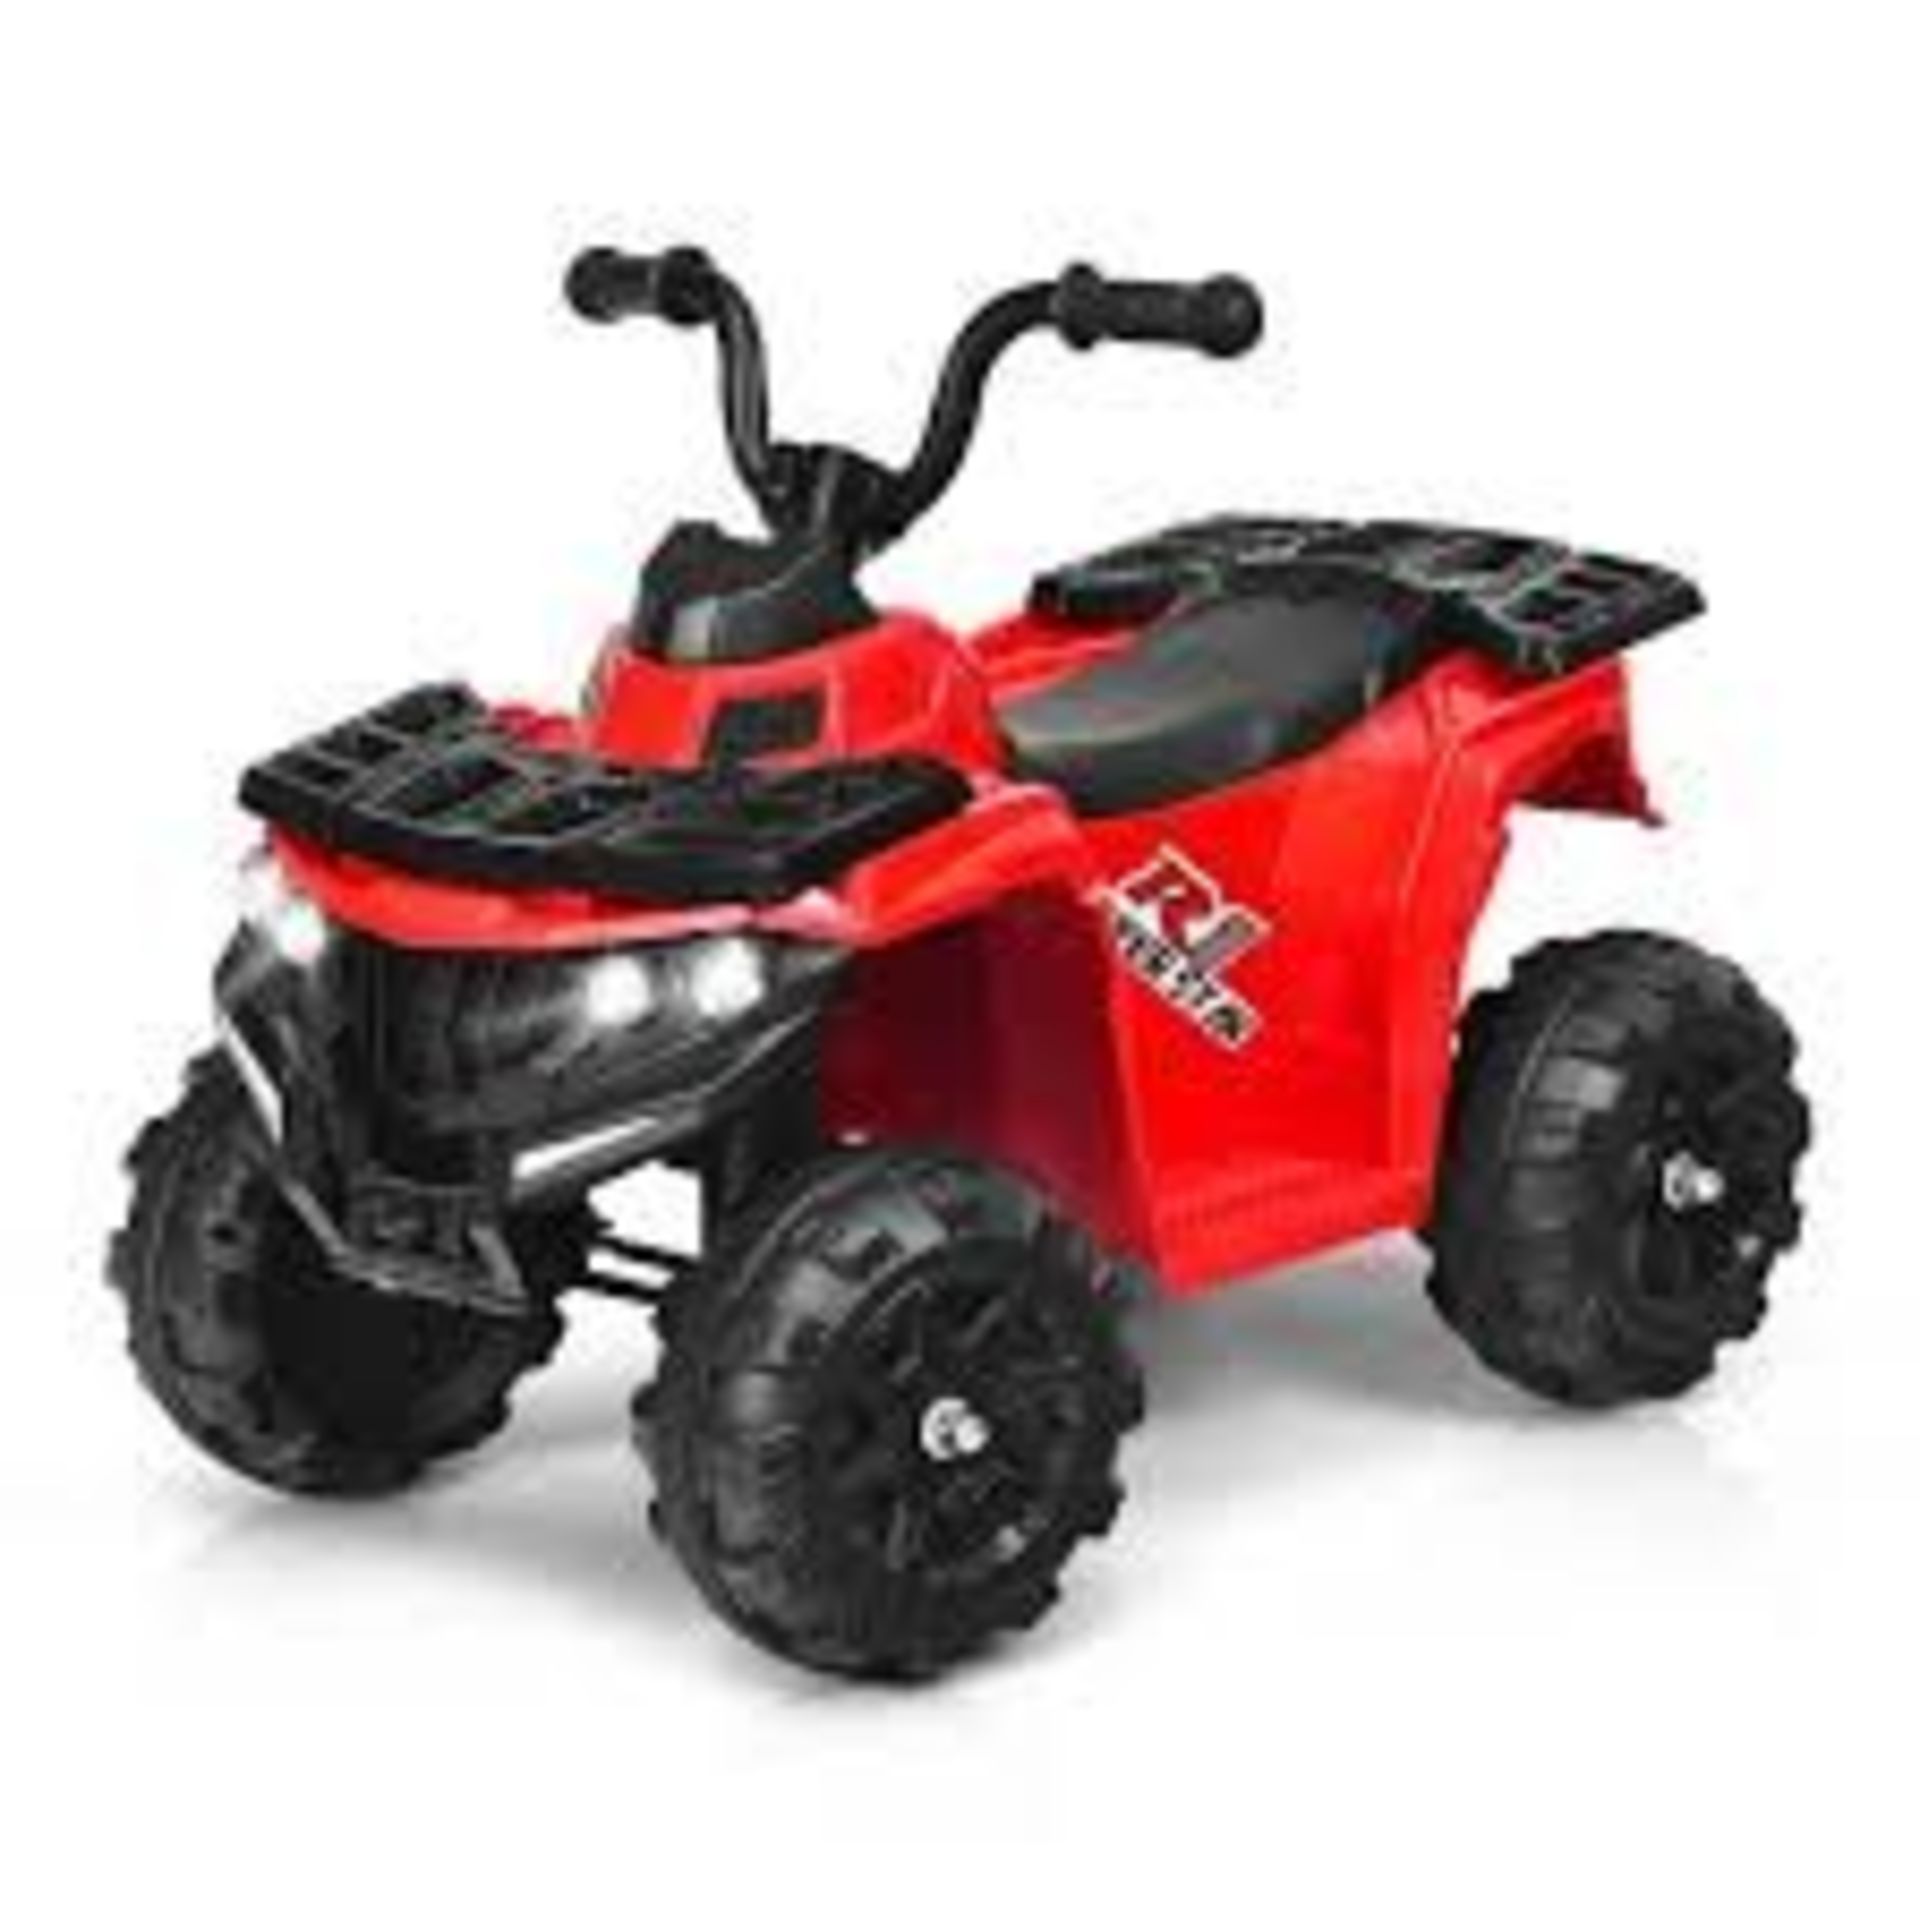 Terrain Electric Quad Bike for Kids with MP3 and USB. - ER25.